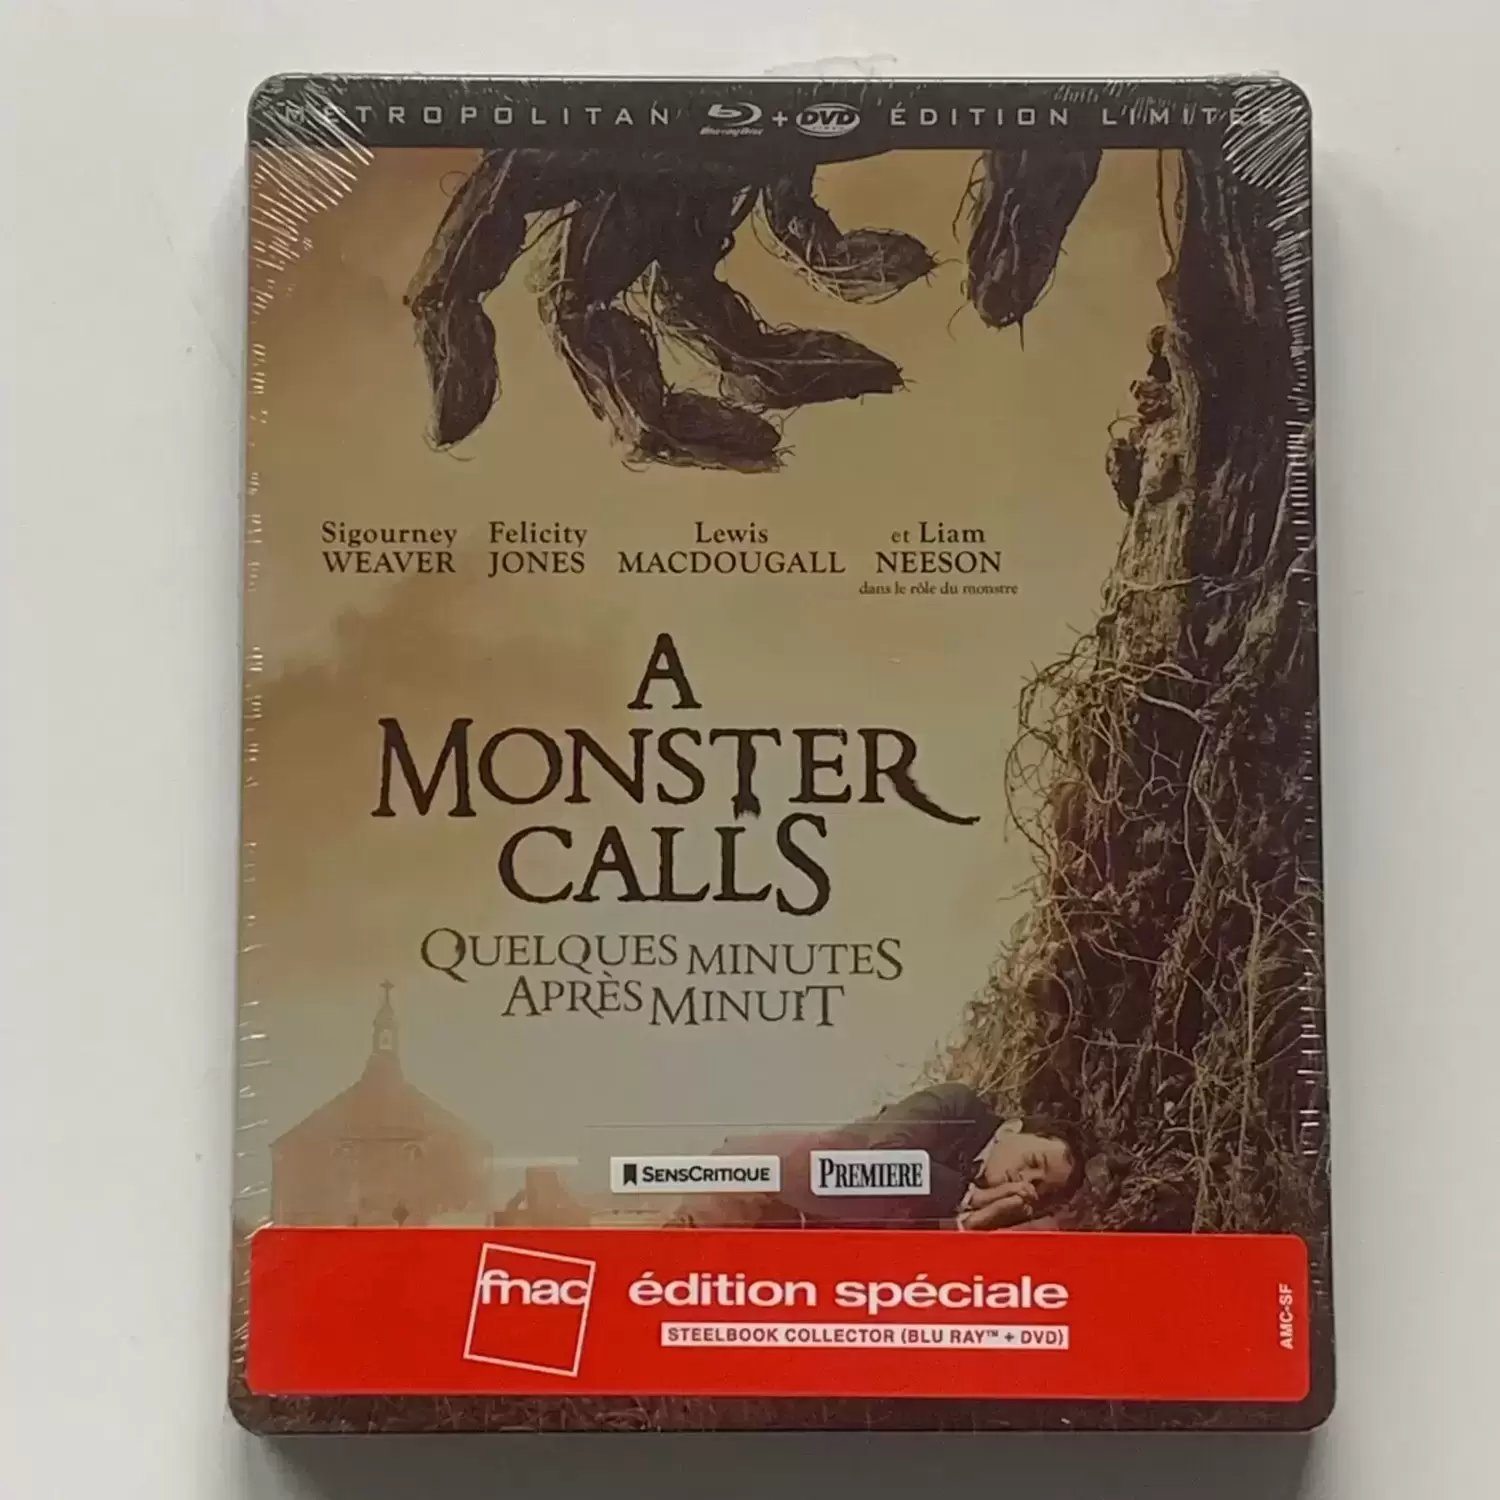 Blu-ray Steelbook - A Monster calls - Quelques Minutes après minuit [Steelbook Blu-ray + DVD Edition Spéciale Fnac]